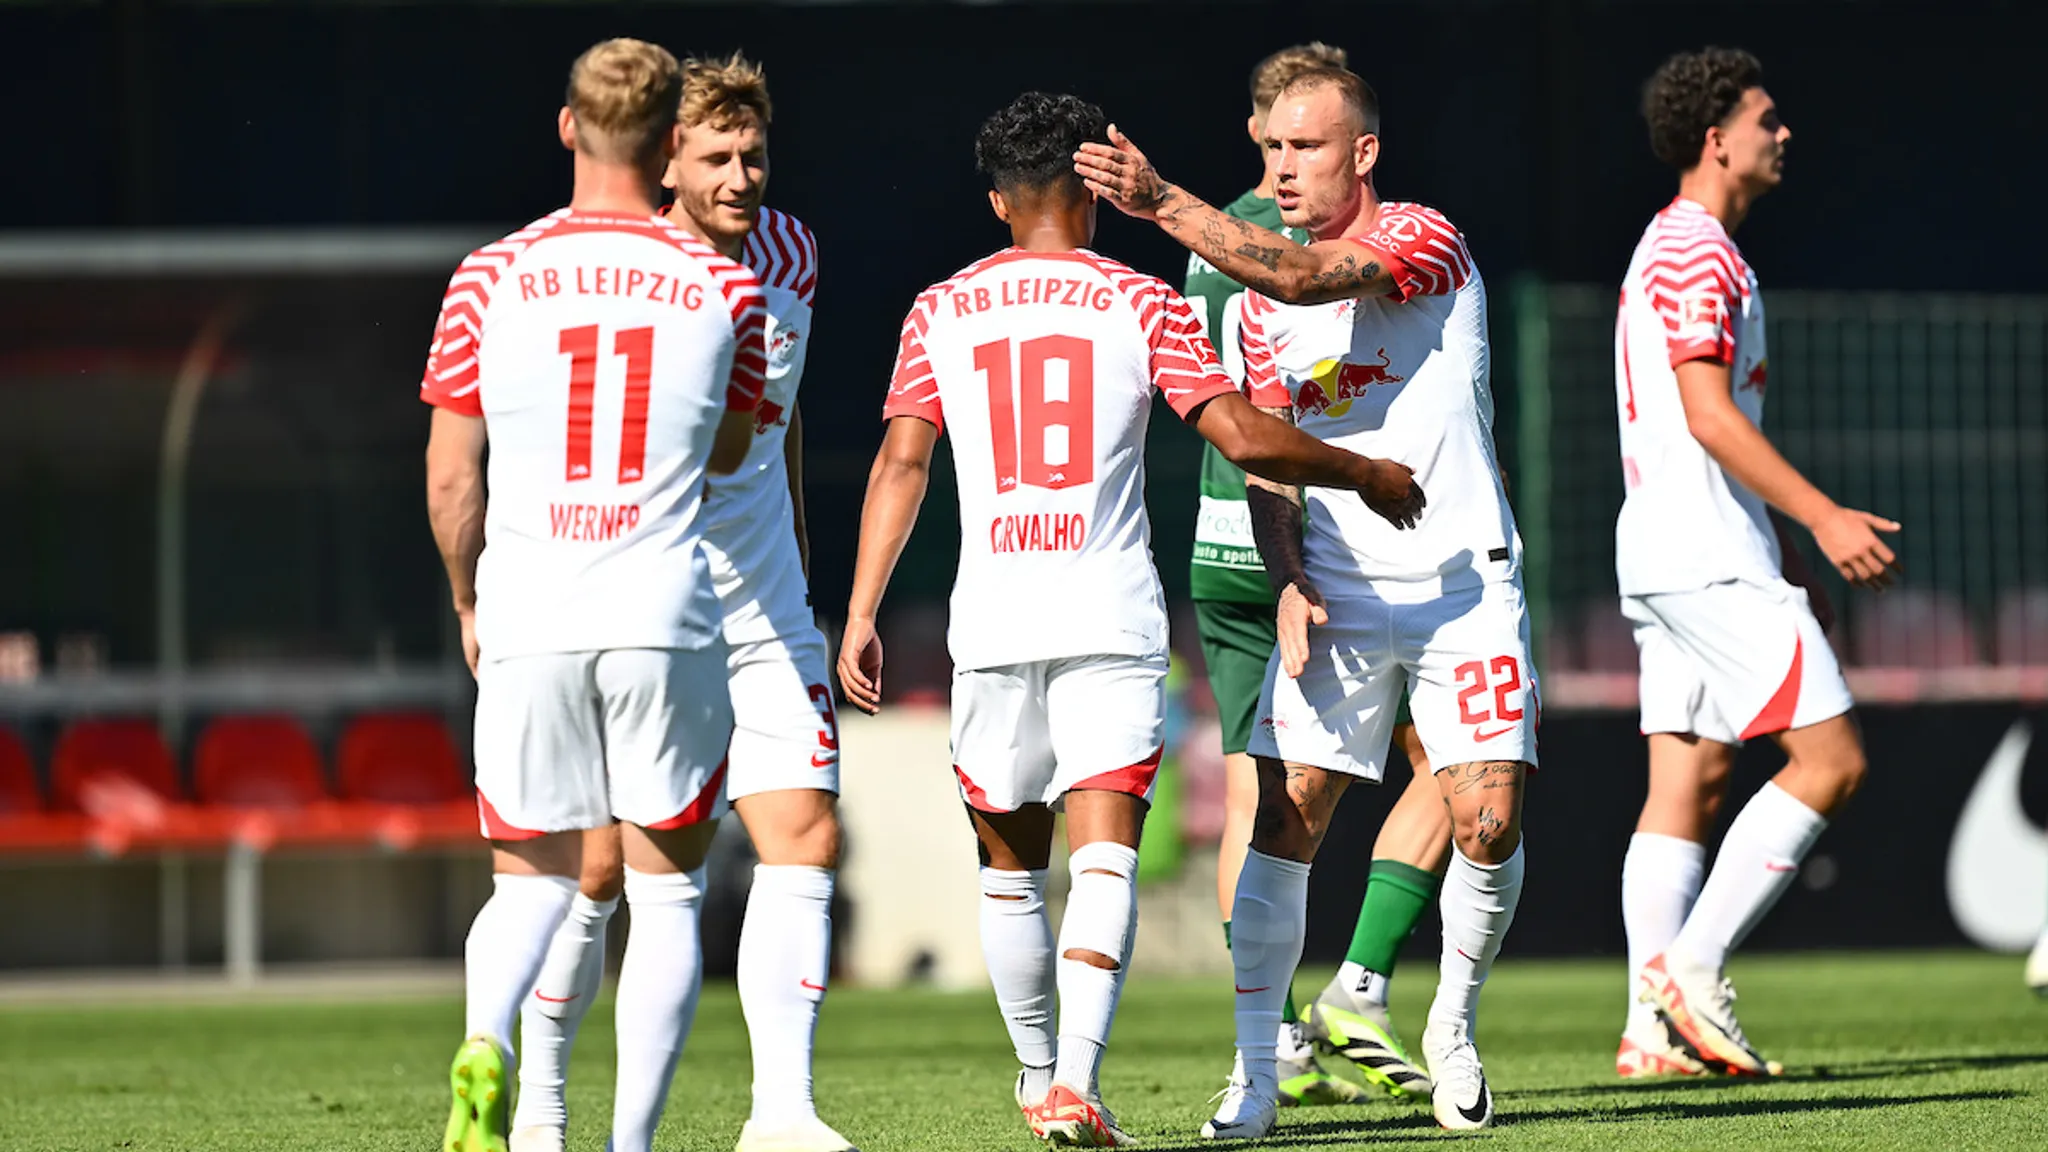 A successful outing: RB Leipzig defeated Wroclaw 4-2 on Thursday.